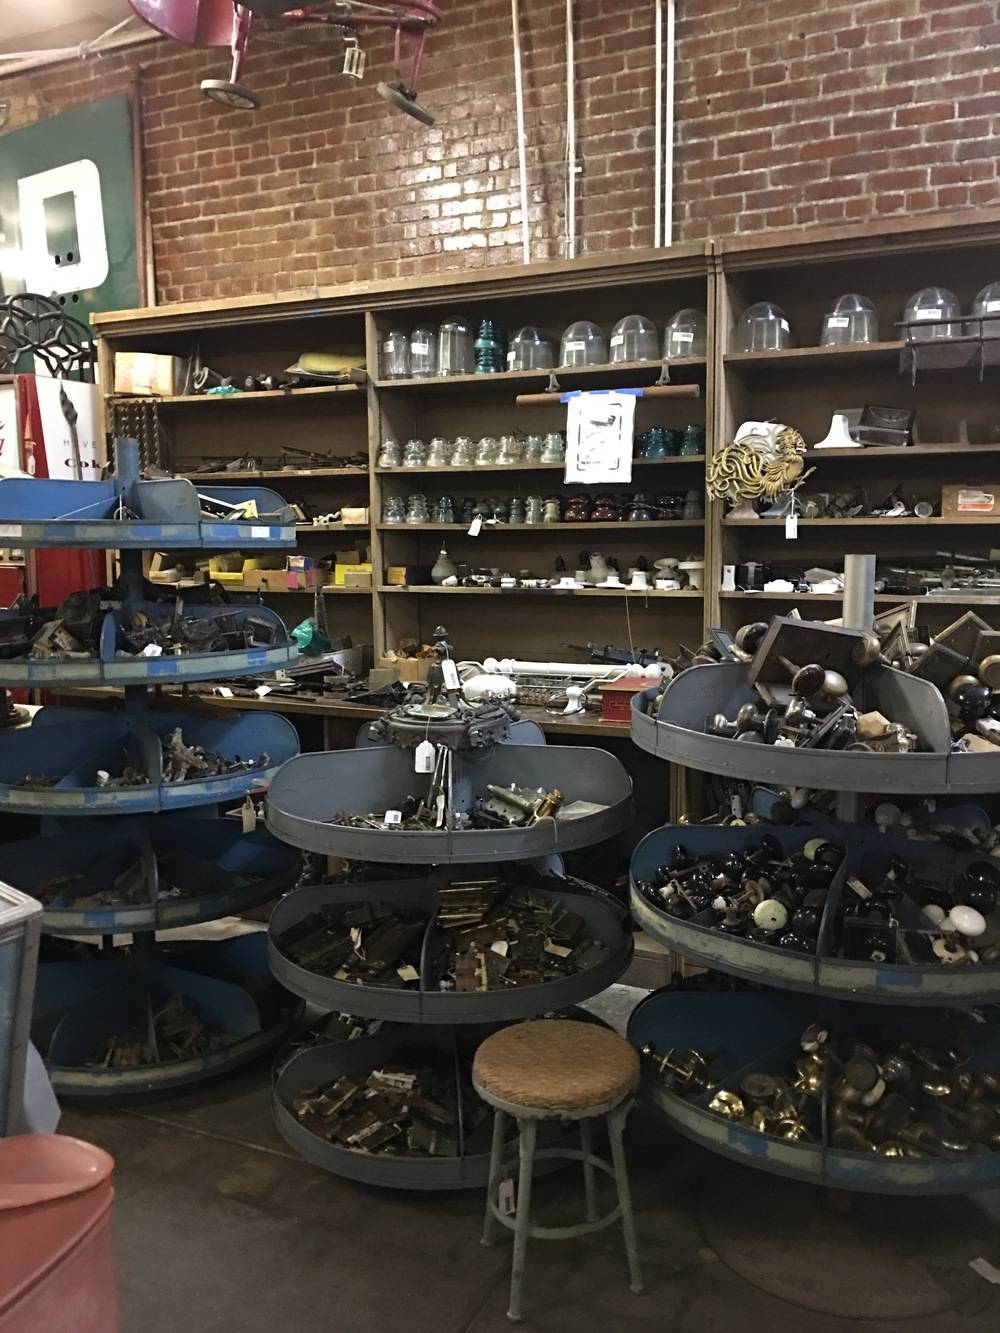 Why everyone should check out their local salvage store